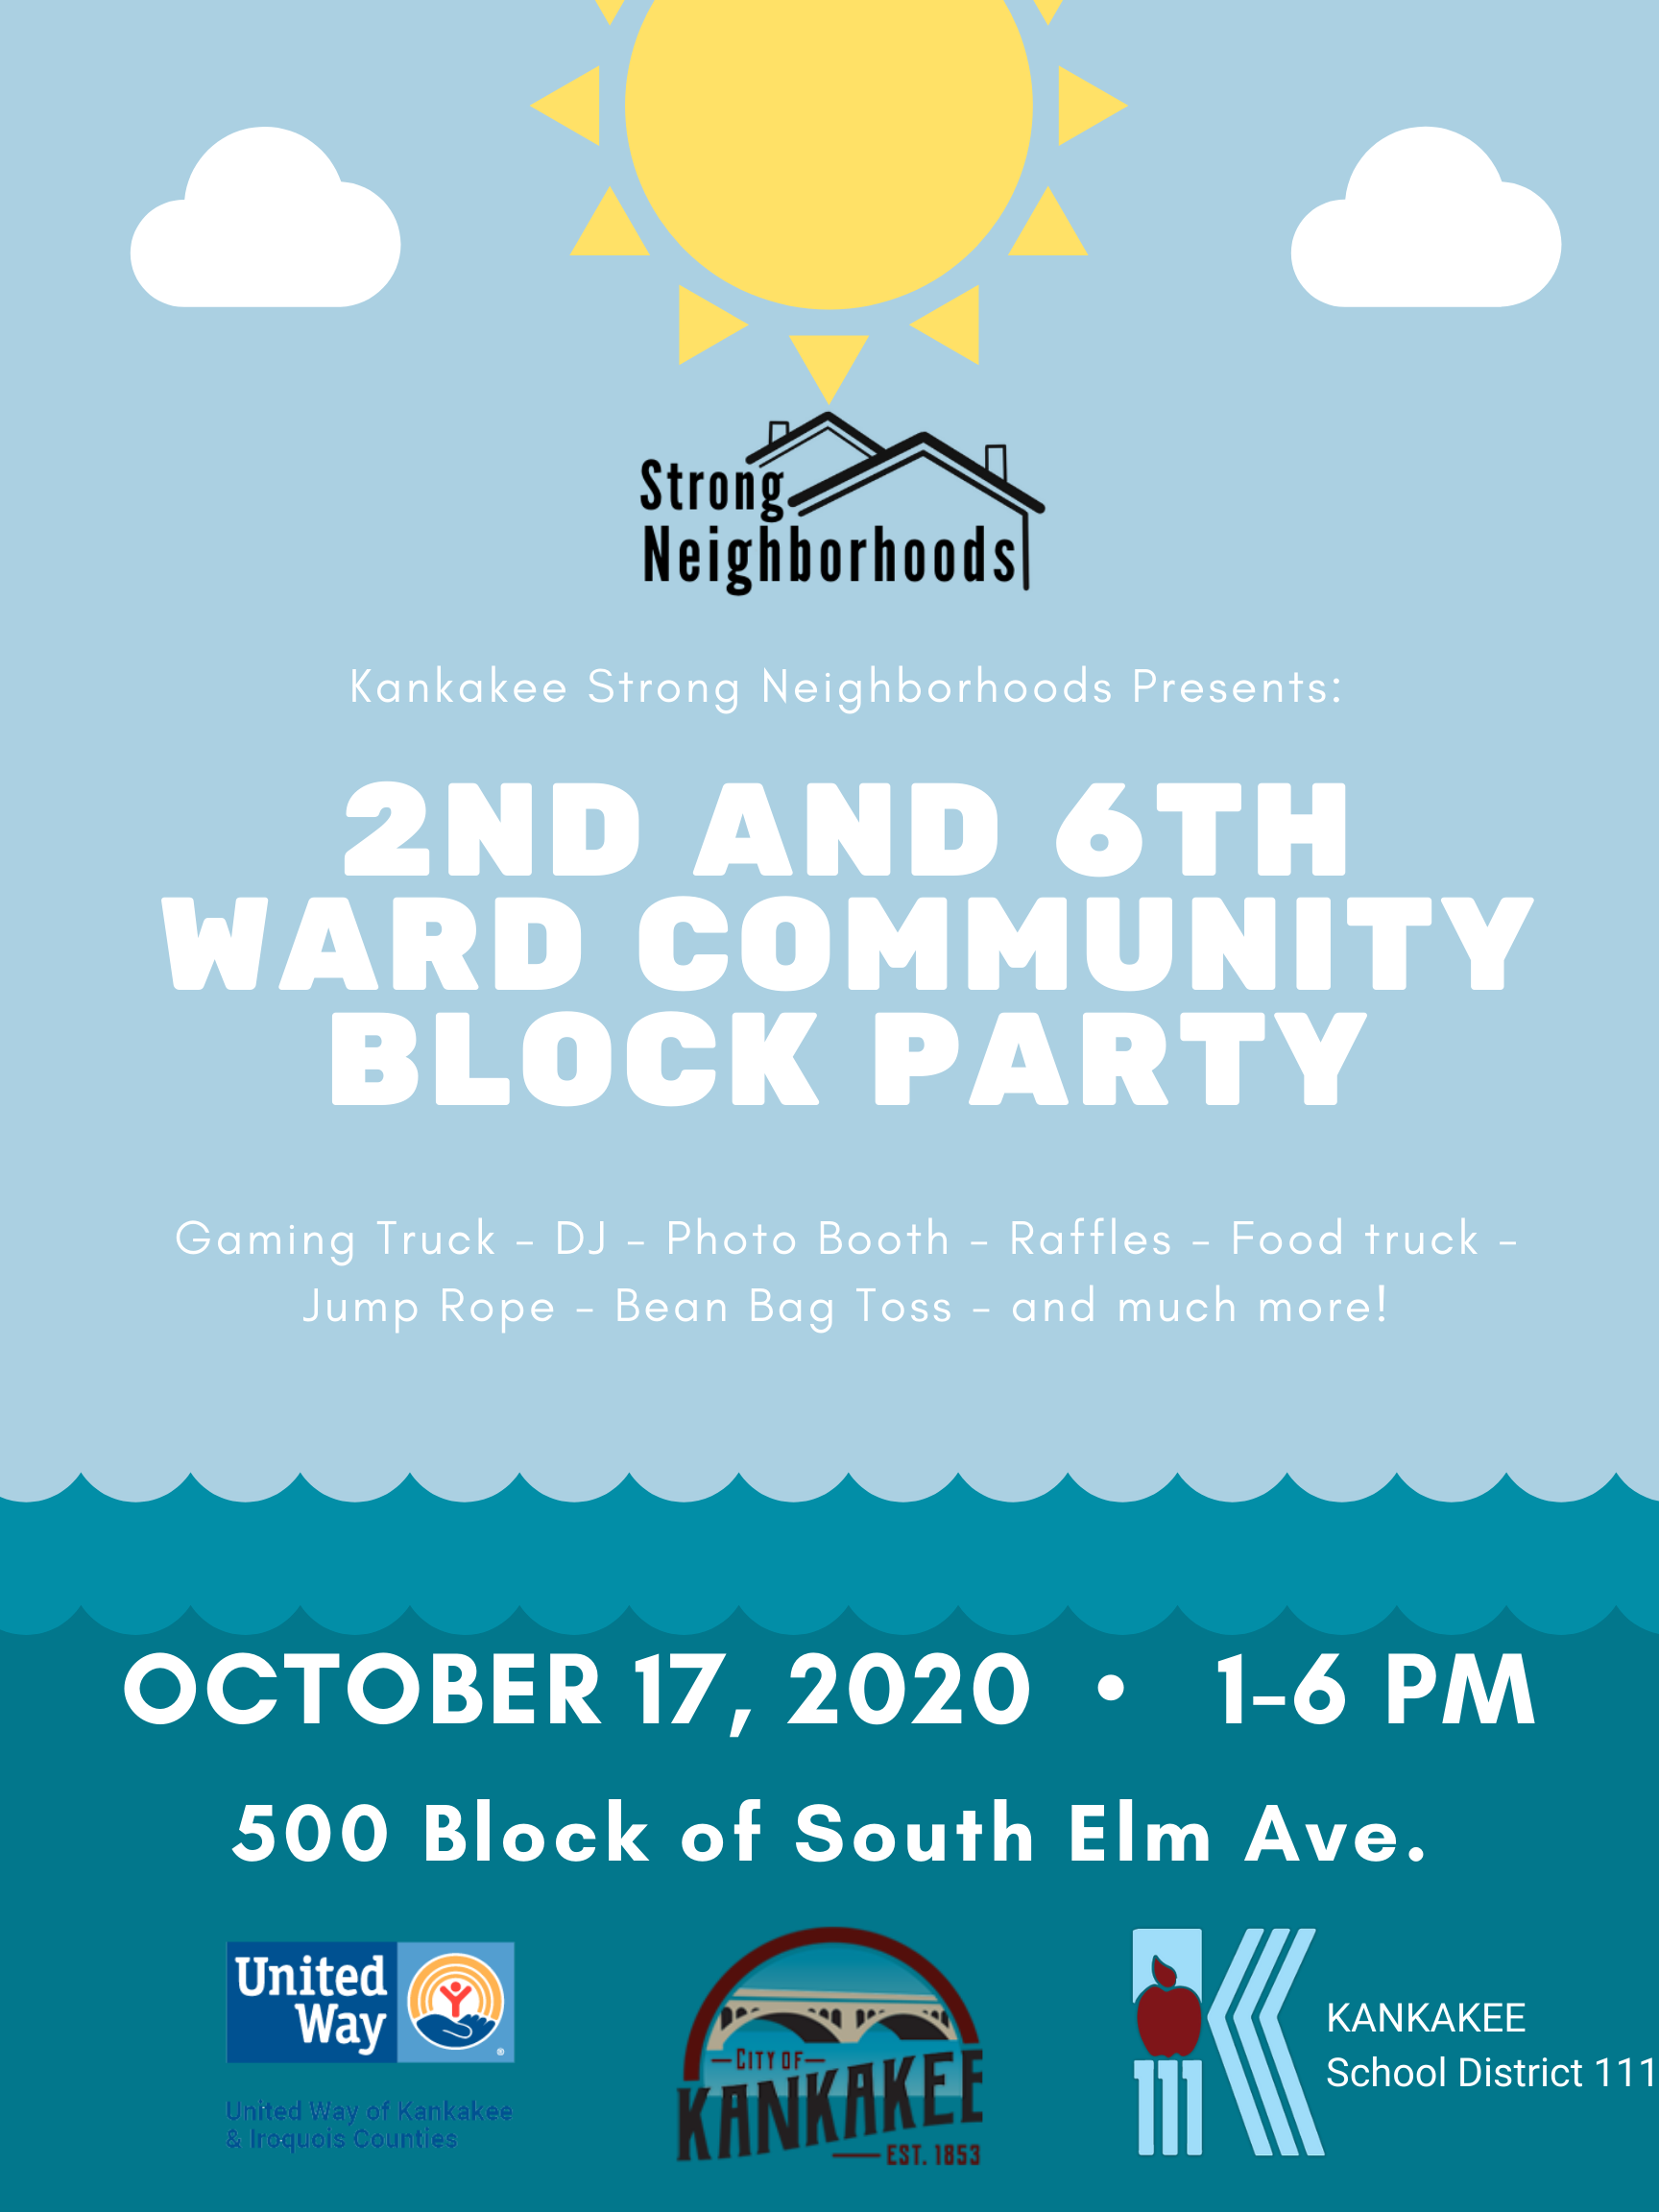 2ND AND 6TH WARD COMMUNITY BLOCK PARTY